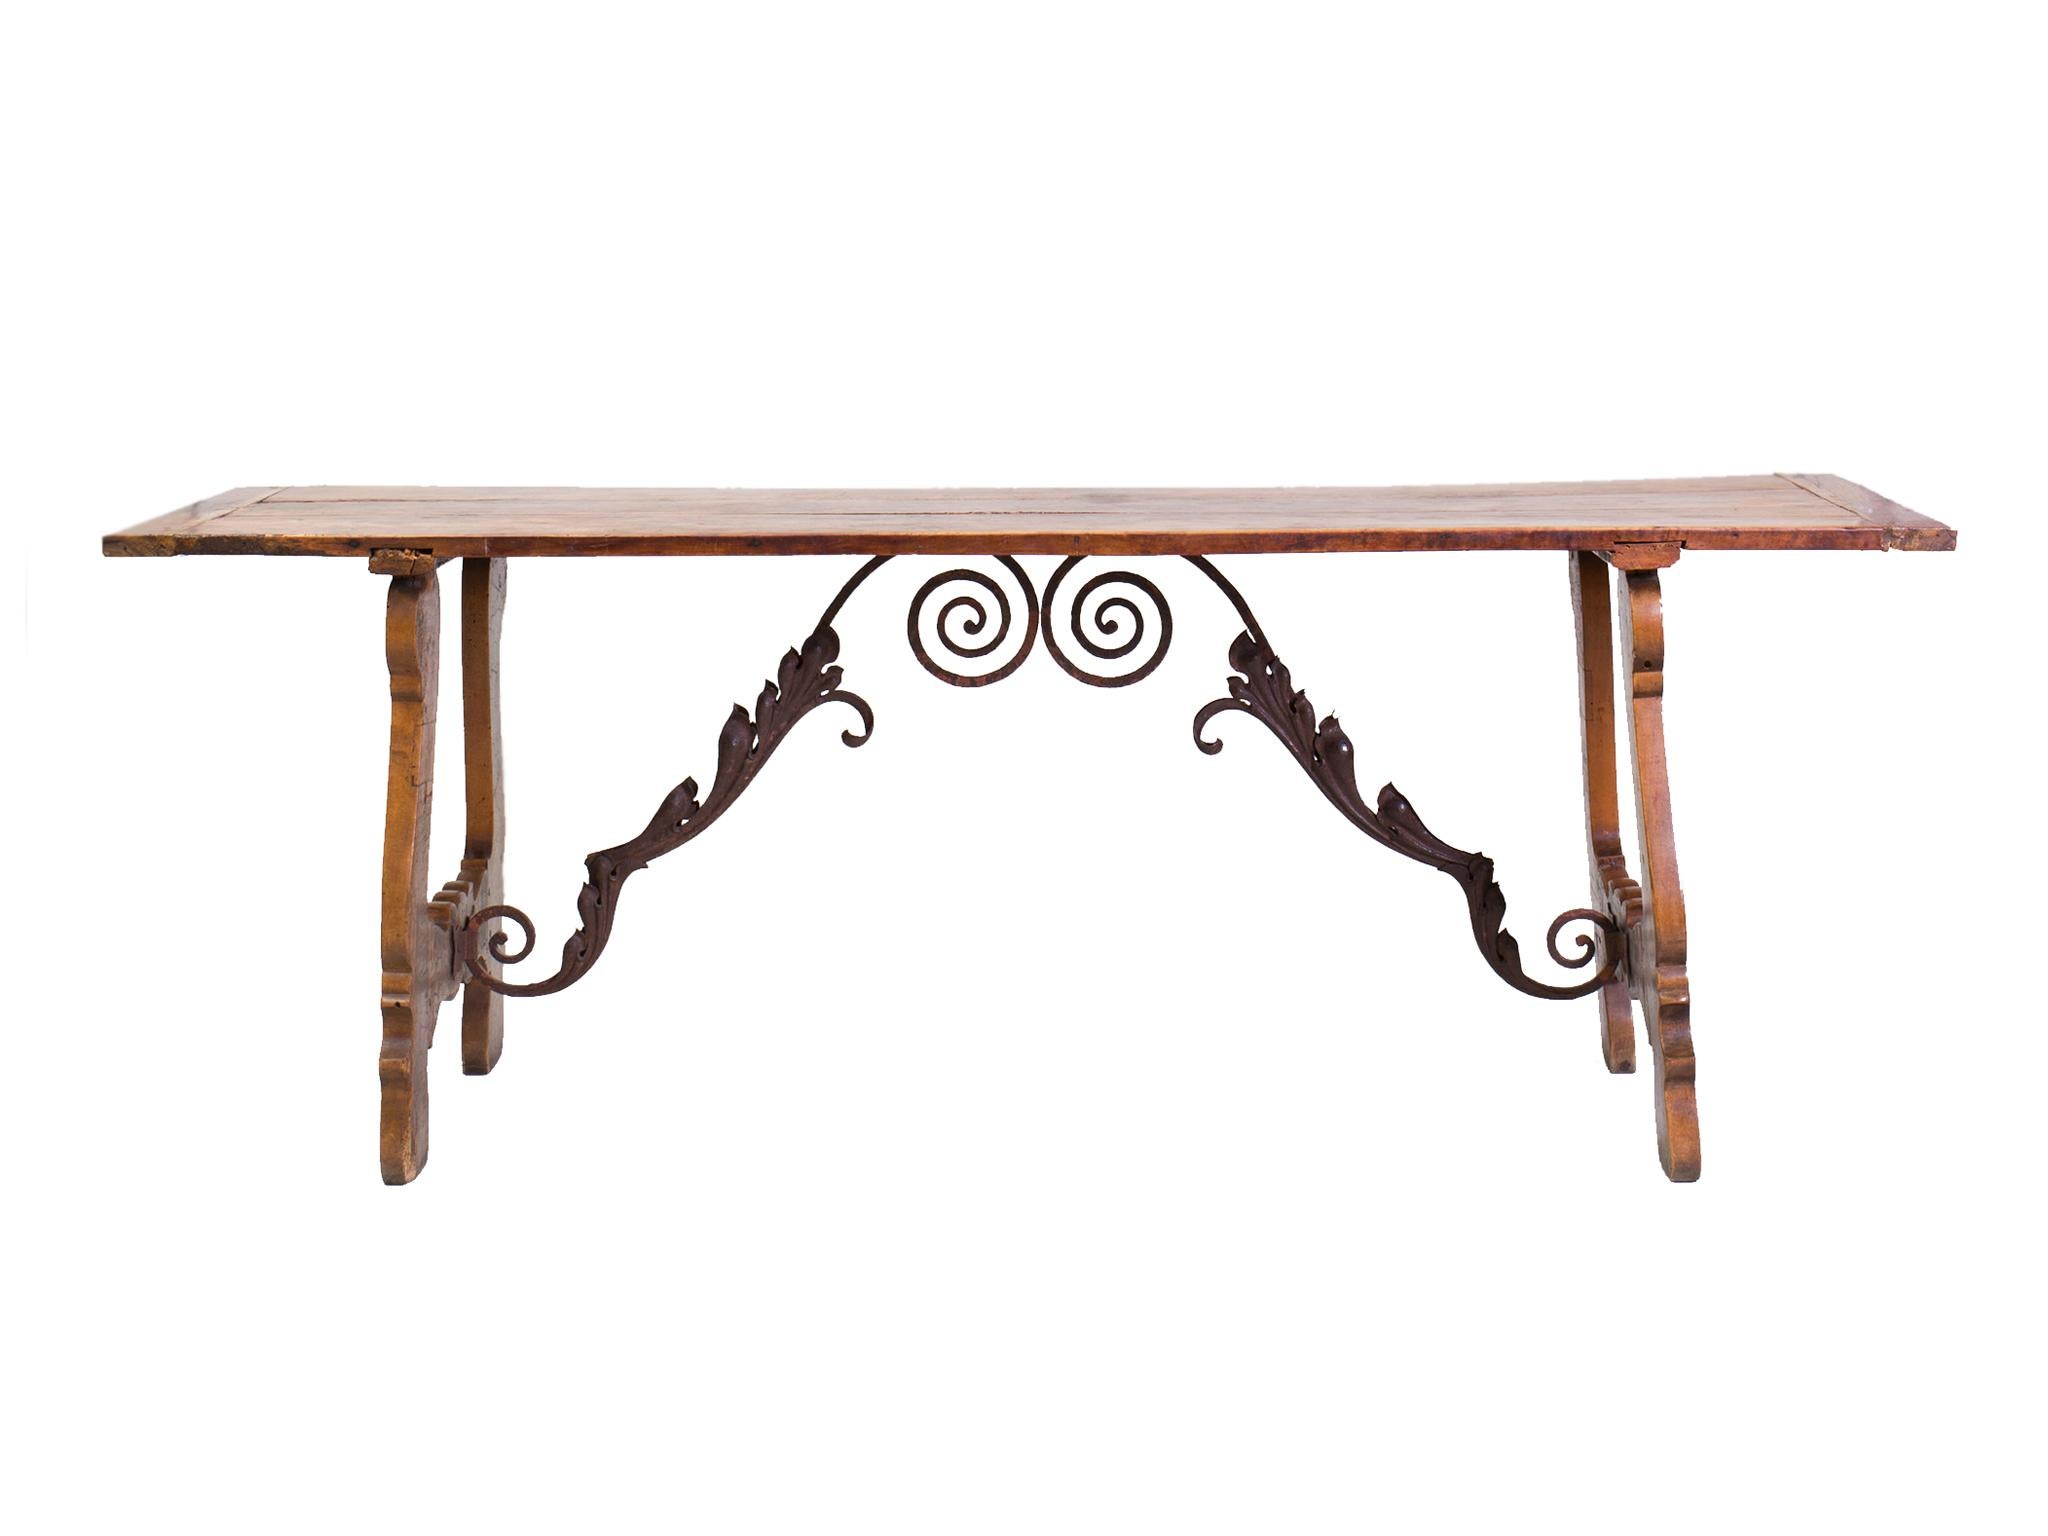 This 19th century dining table was designed and crafted in the Spanish Baroque style. It is comprised of elmwood. The surface has aged beautifully here, accruing a weathered patina that gives the table a historical presence. The legs and tabletop